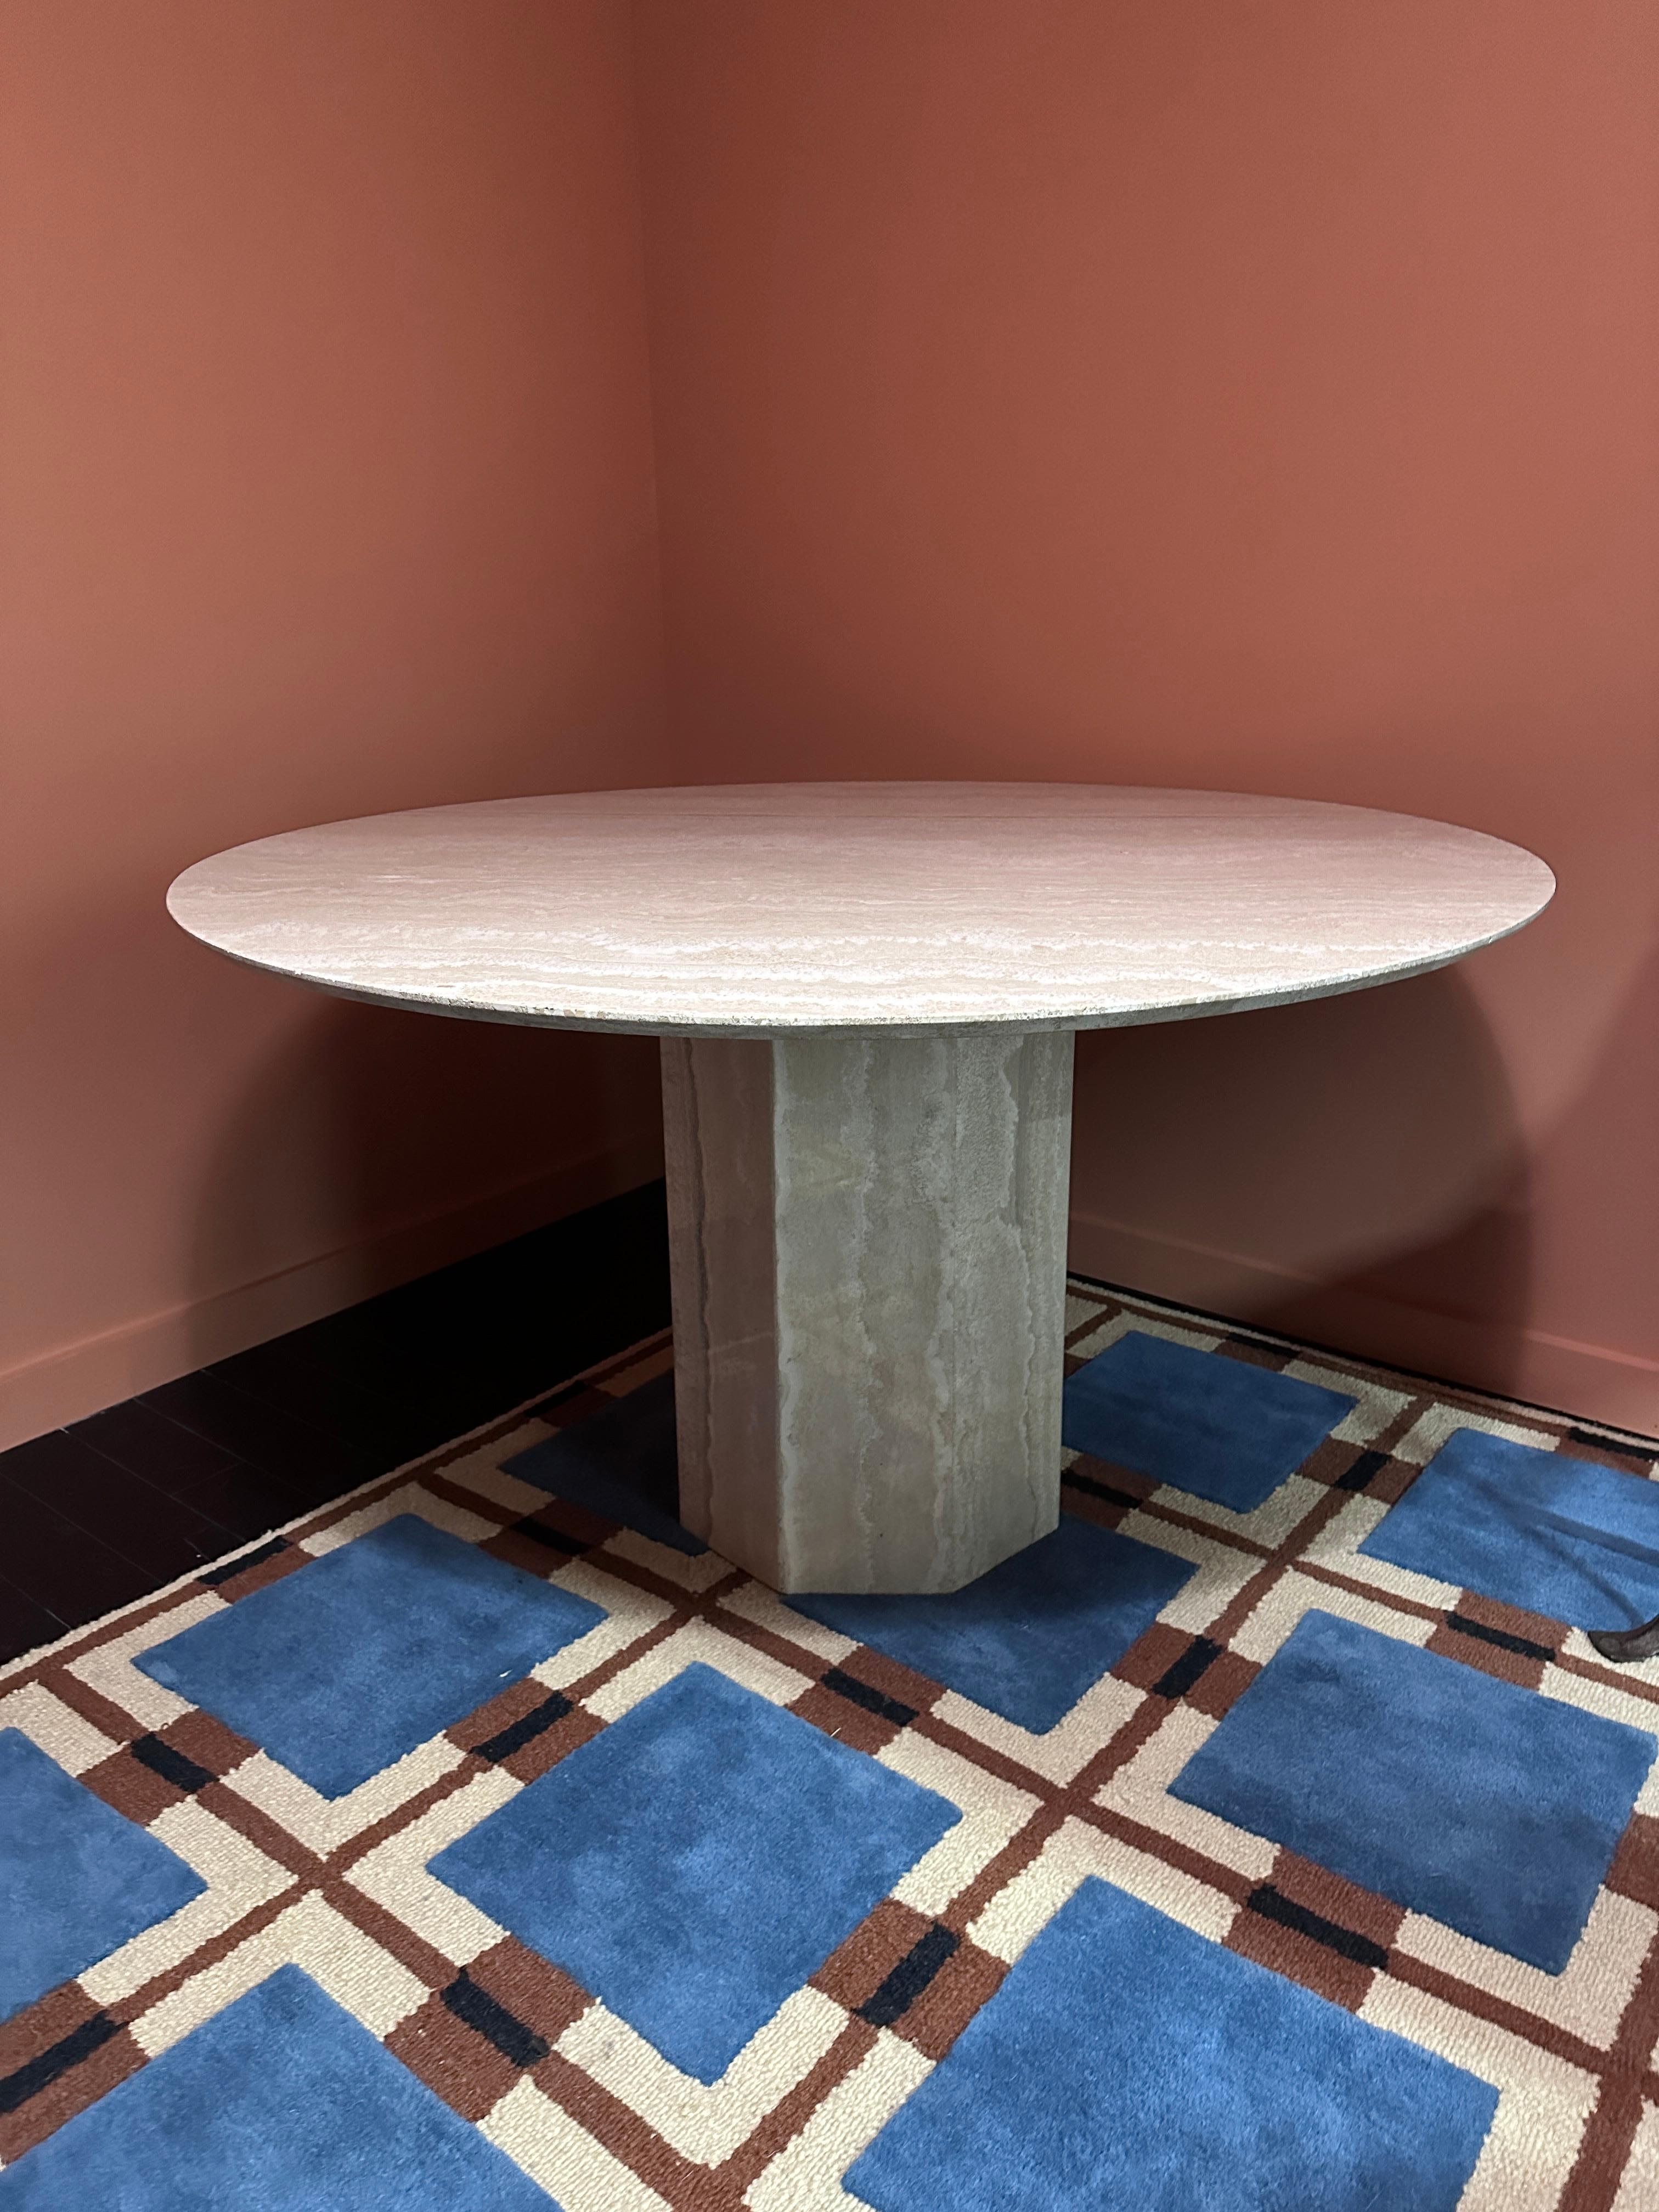 Round Italian travertine dining table with beautiful veining in creams, white, beige, and gray. Top enforced with thin wood. The top detaches from the base for easy transport. Base is octagonal. Minimal signs of age-related wear. Two minor non-sharp